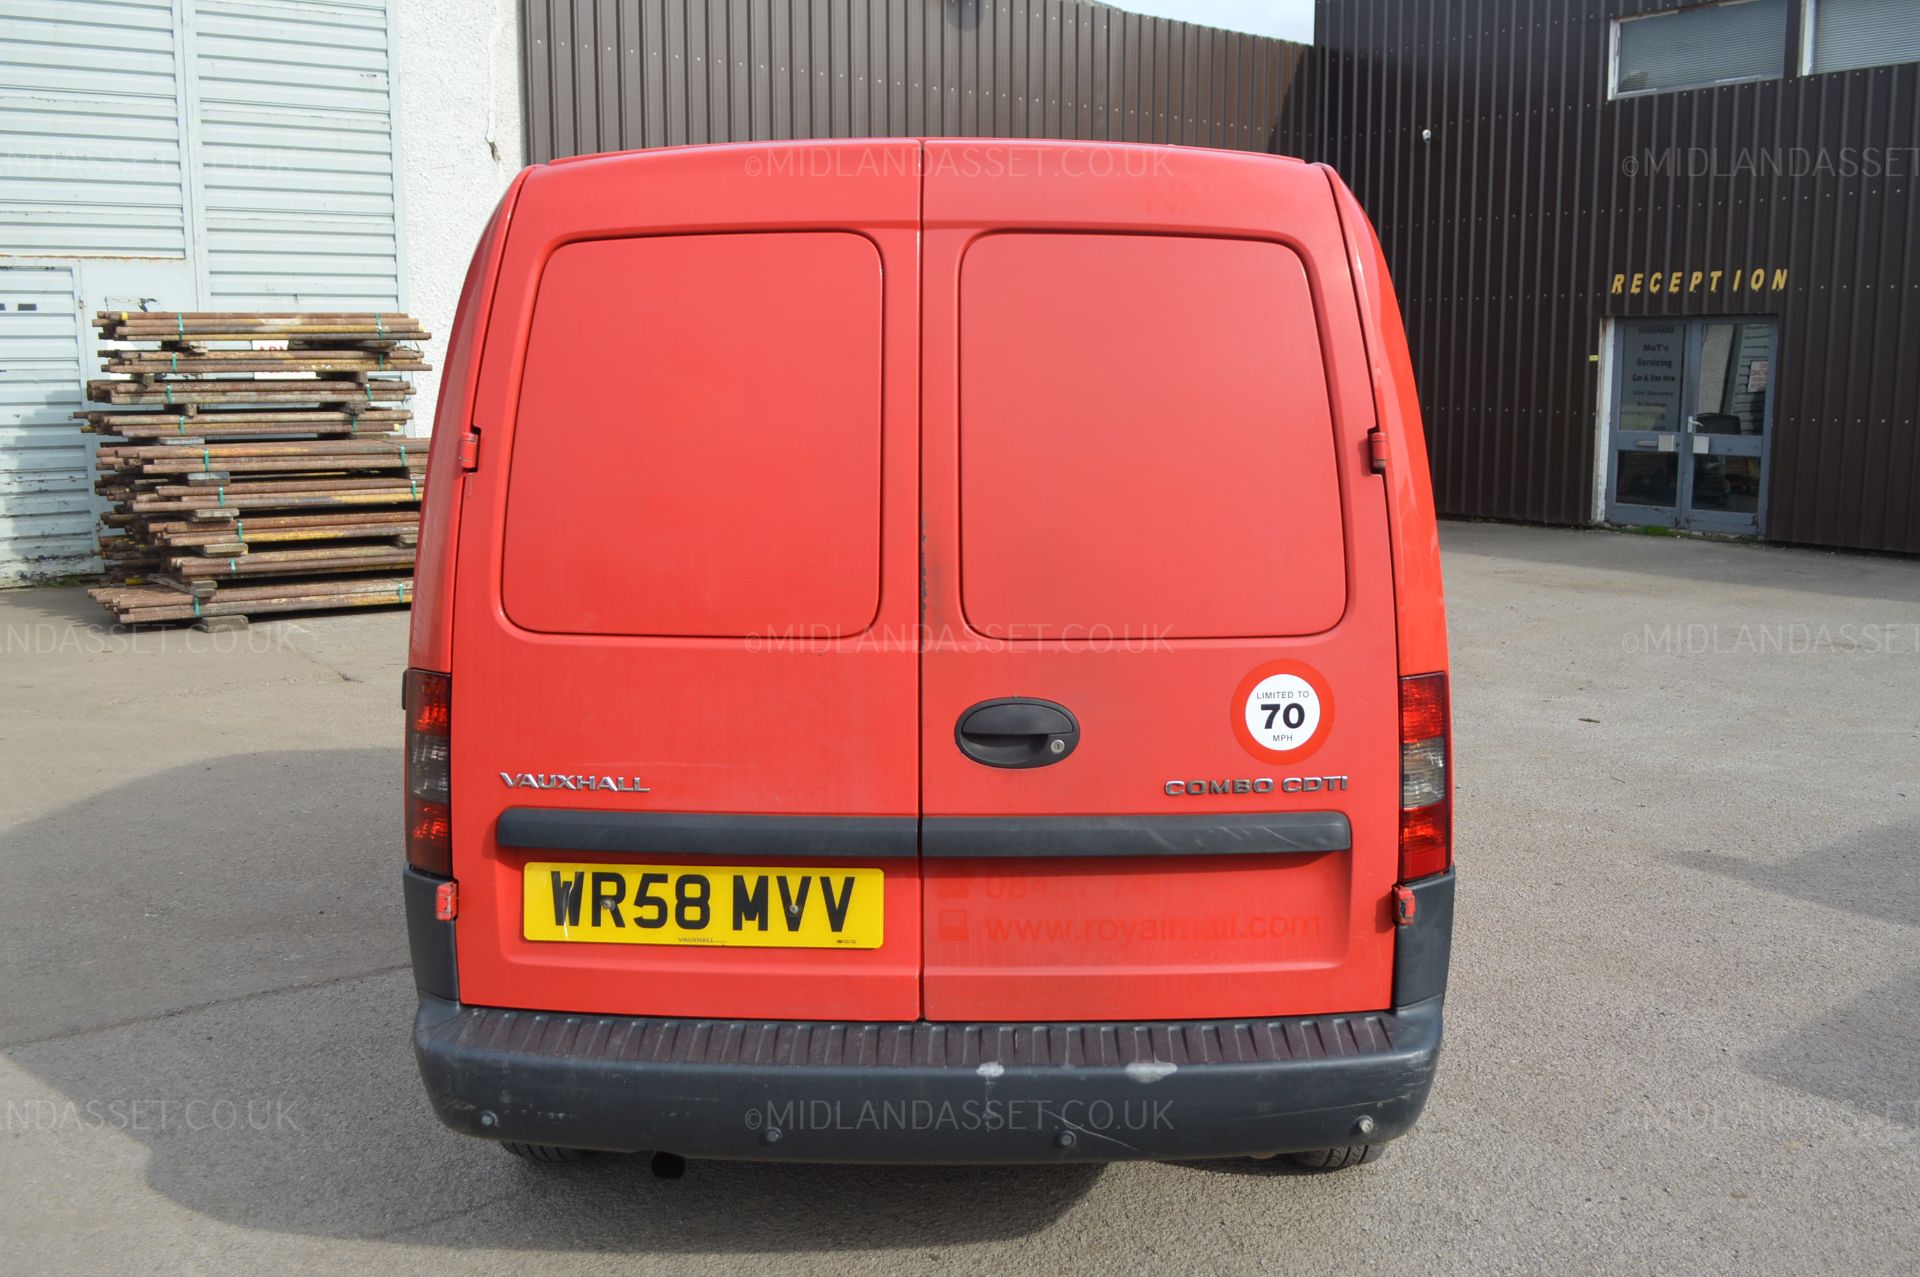 KB - 2008/58 REG VAUXHALL COMBO 1700 CDTI - 1 PREVIOUS OWNER, ROYAL MAIL *NO VAT*   DATE OF - Image 5 of 19